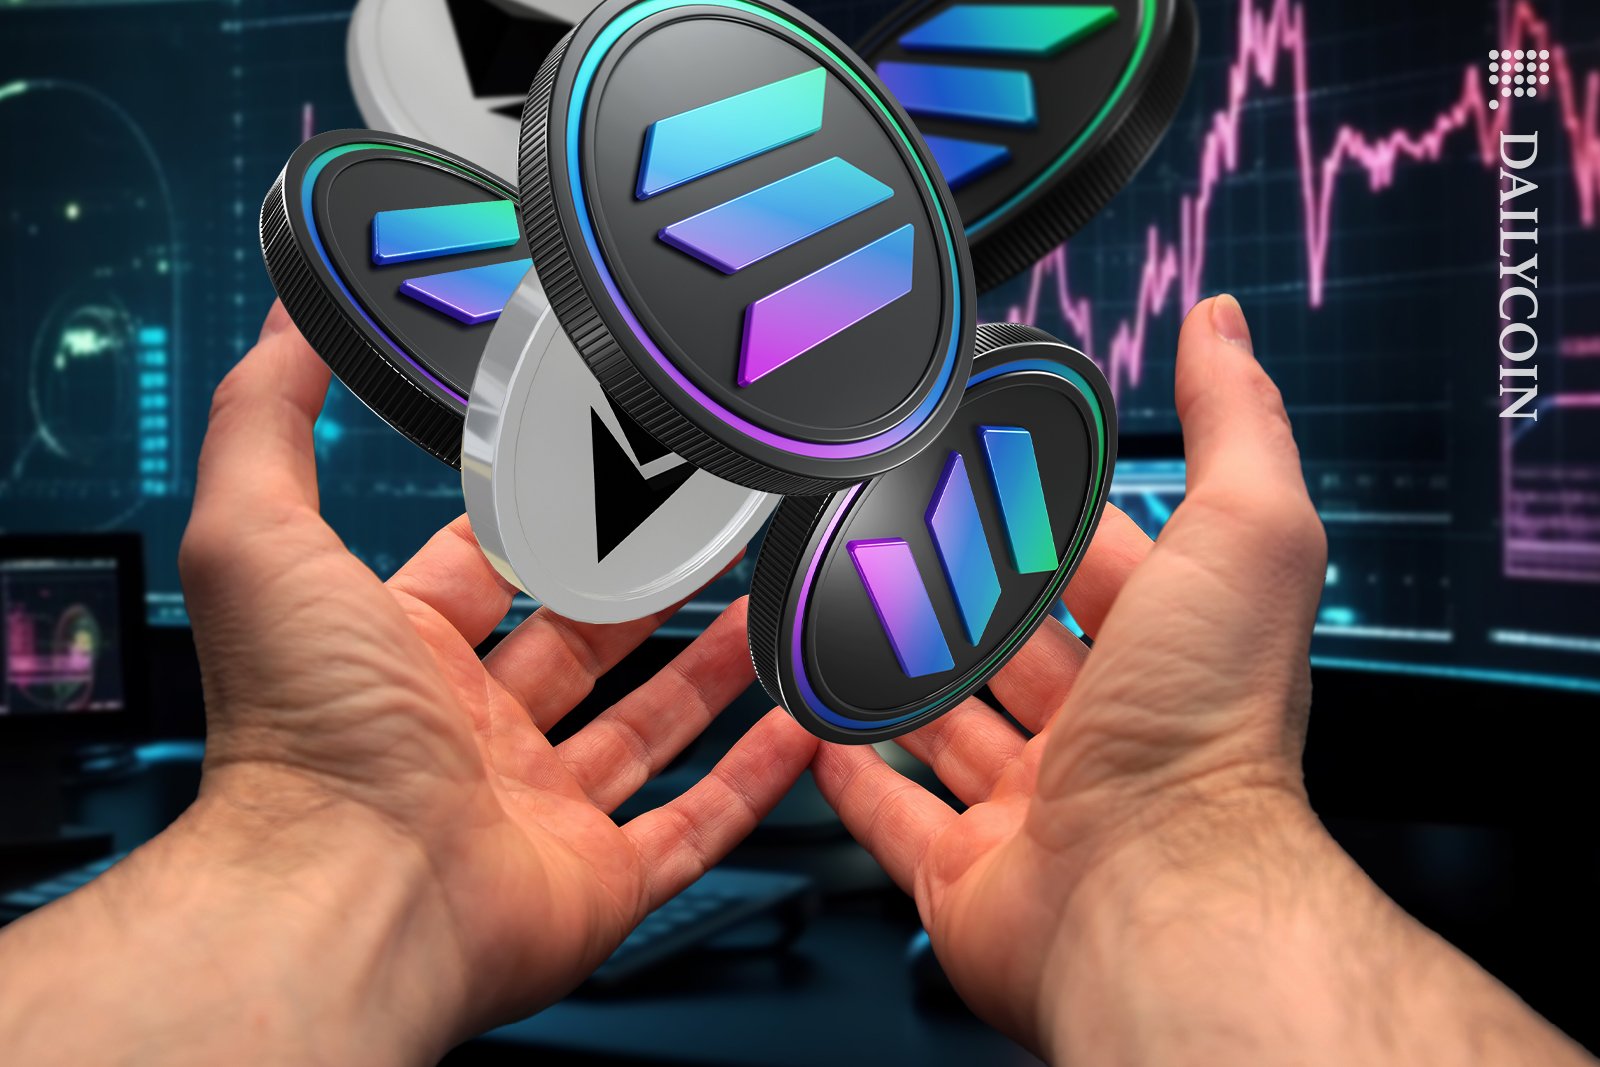 Hands holding Solana and ETH coins looking at the chart.